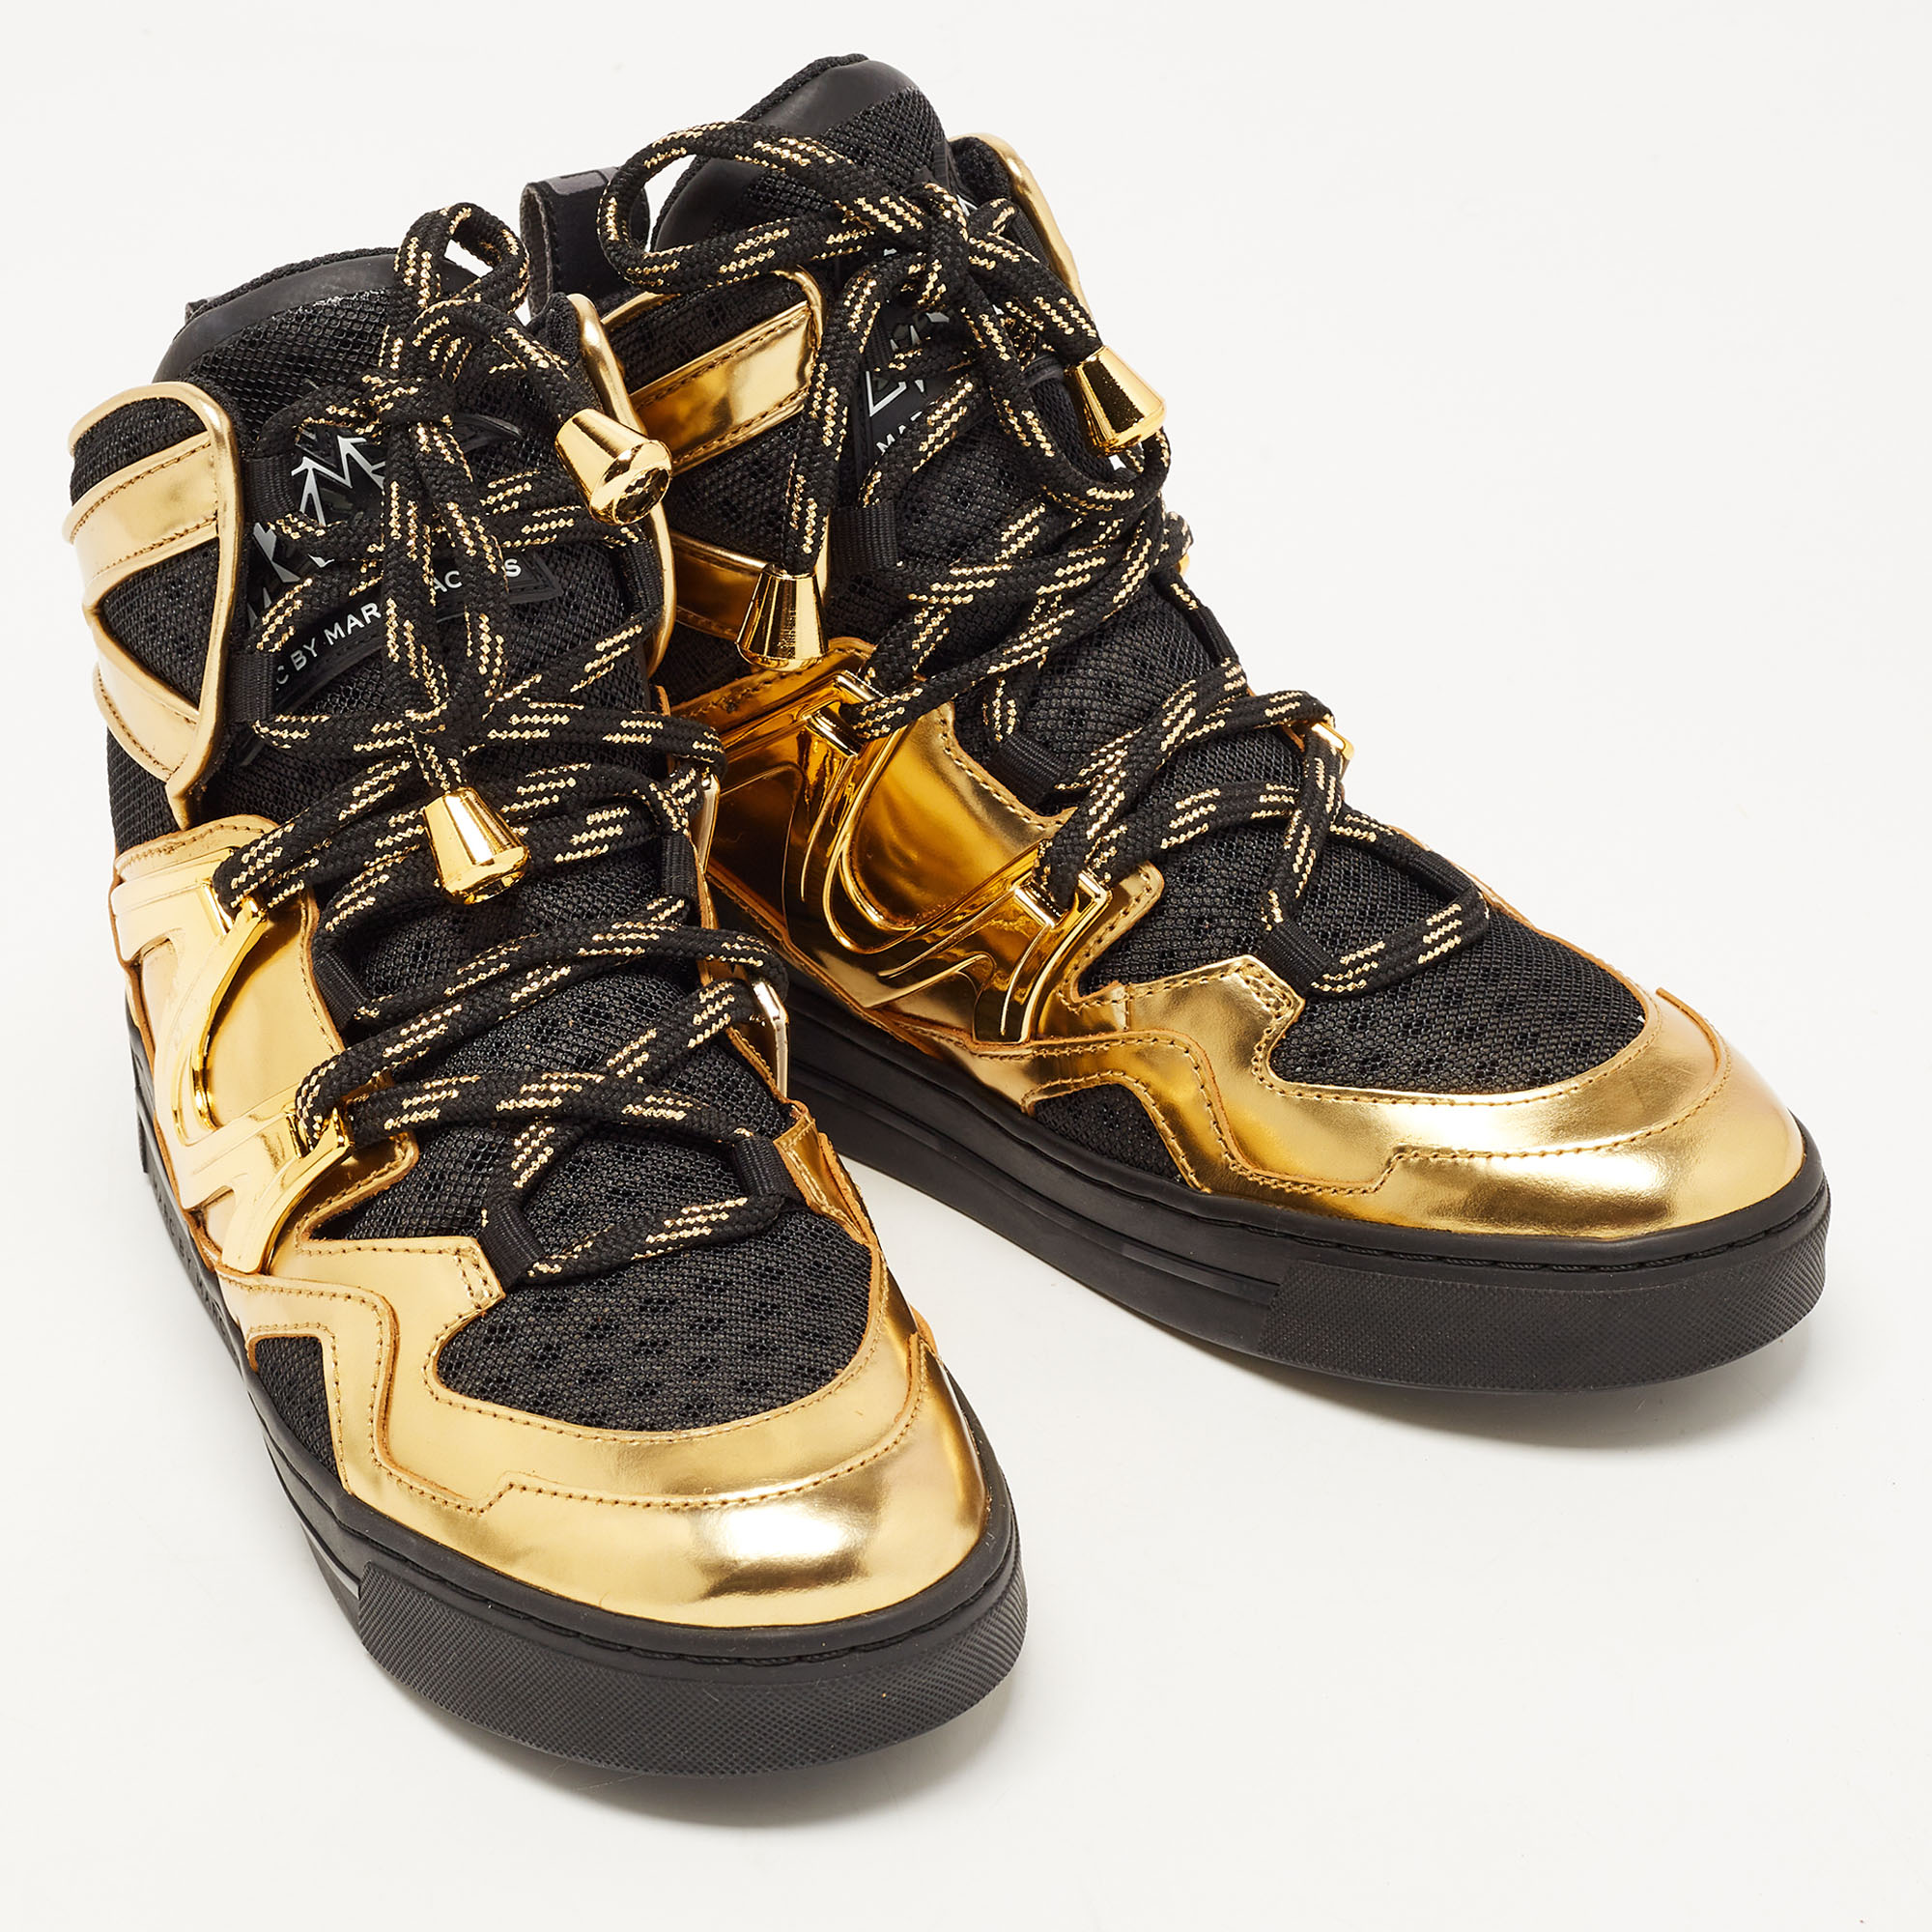 Marc By Marc Jacobs Gold/Black Leather And Mesh High Top Sneakers Size 36